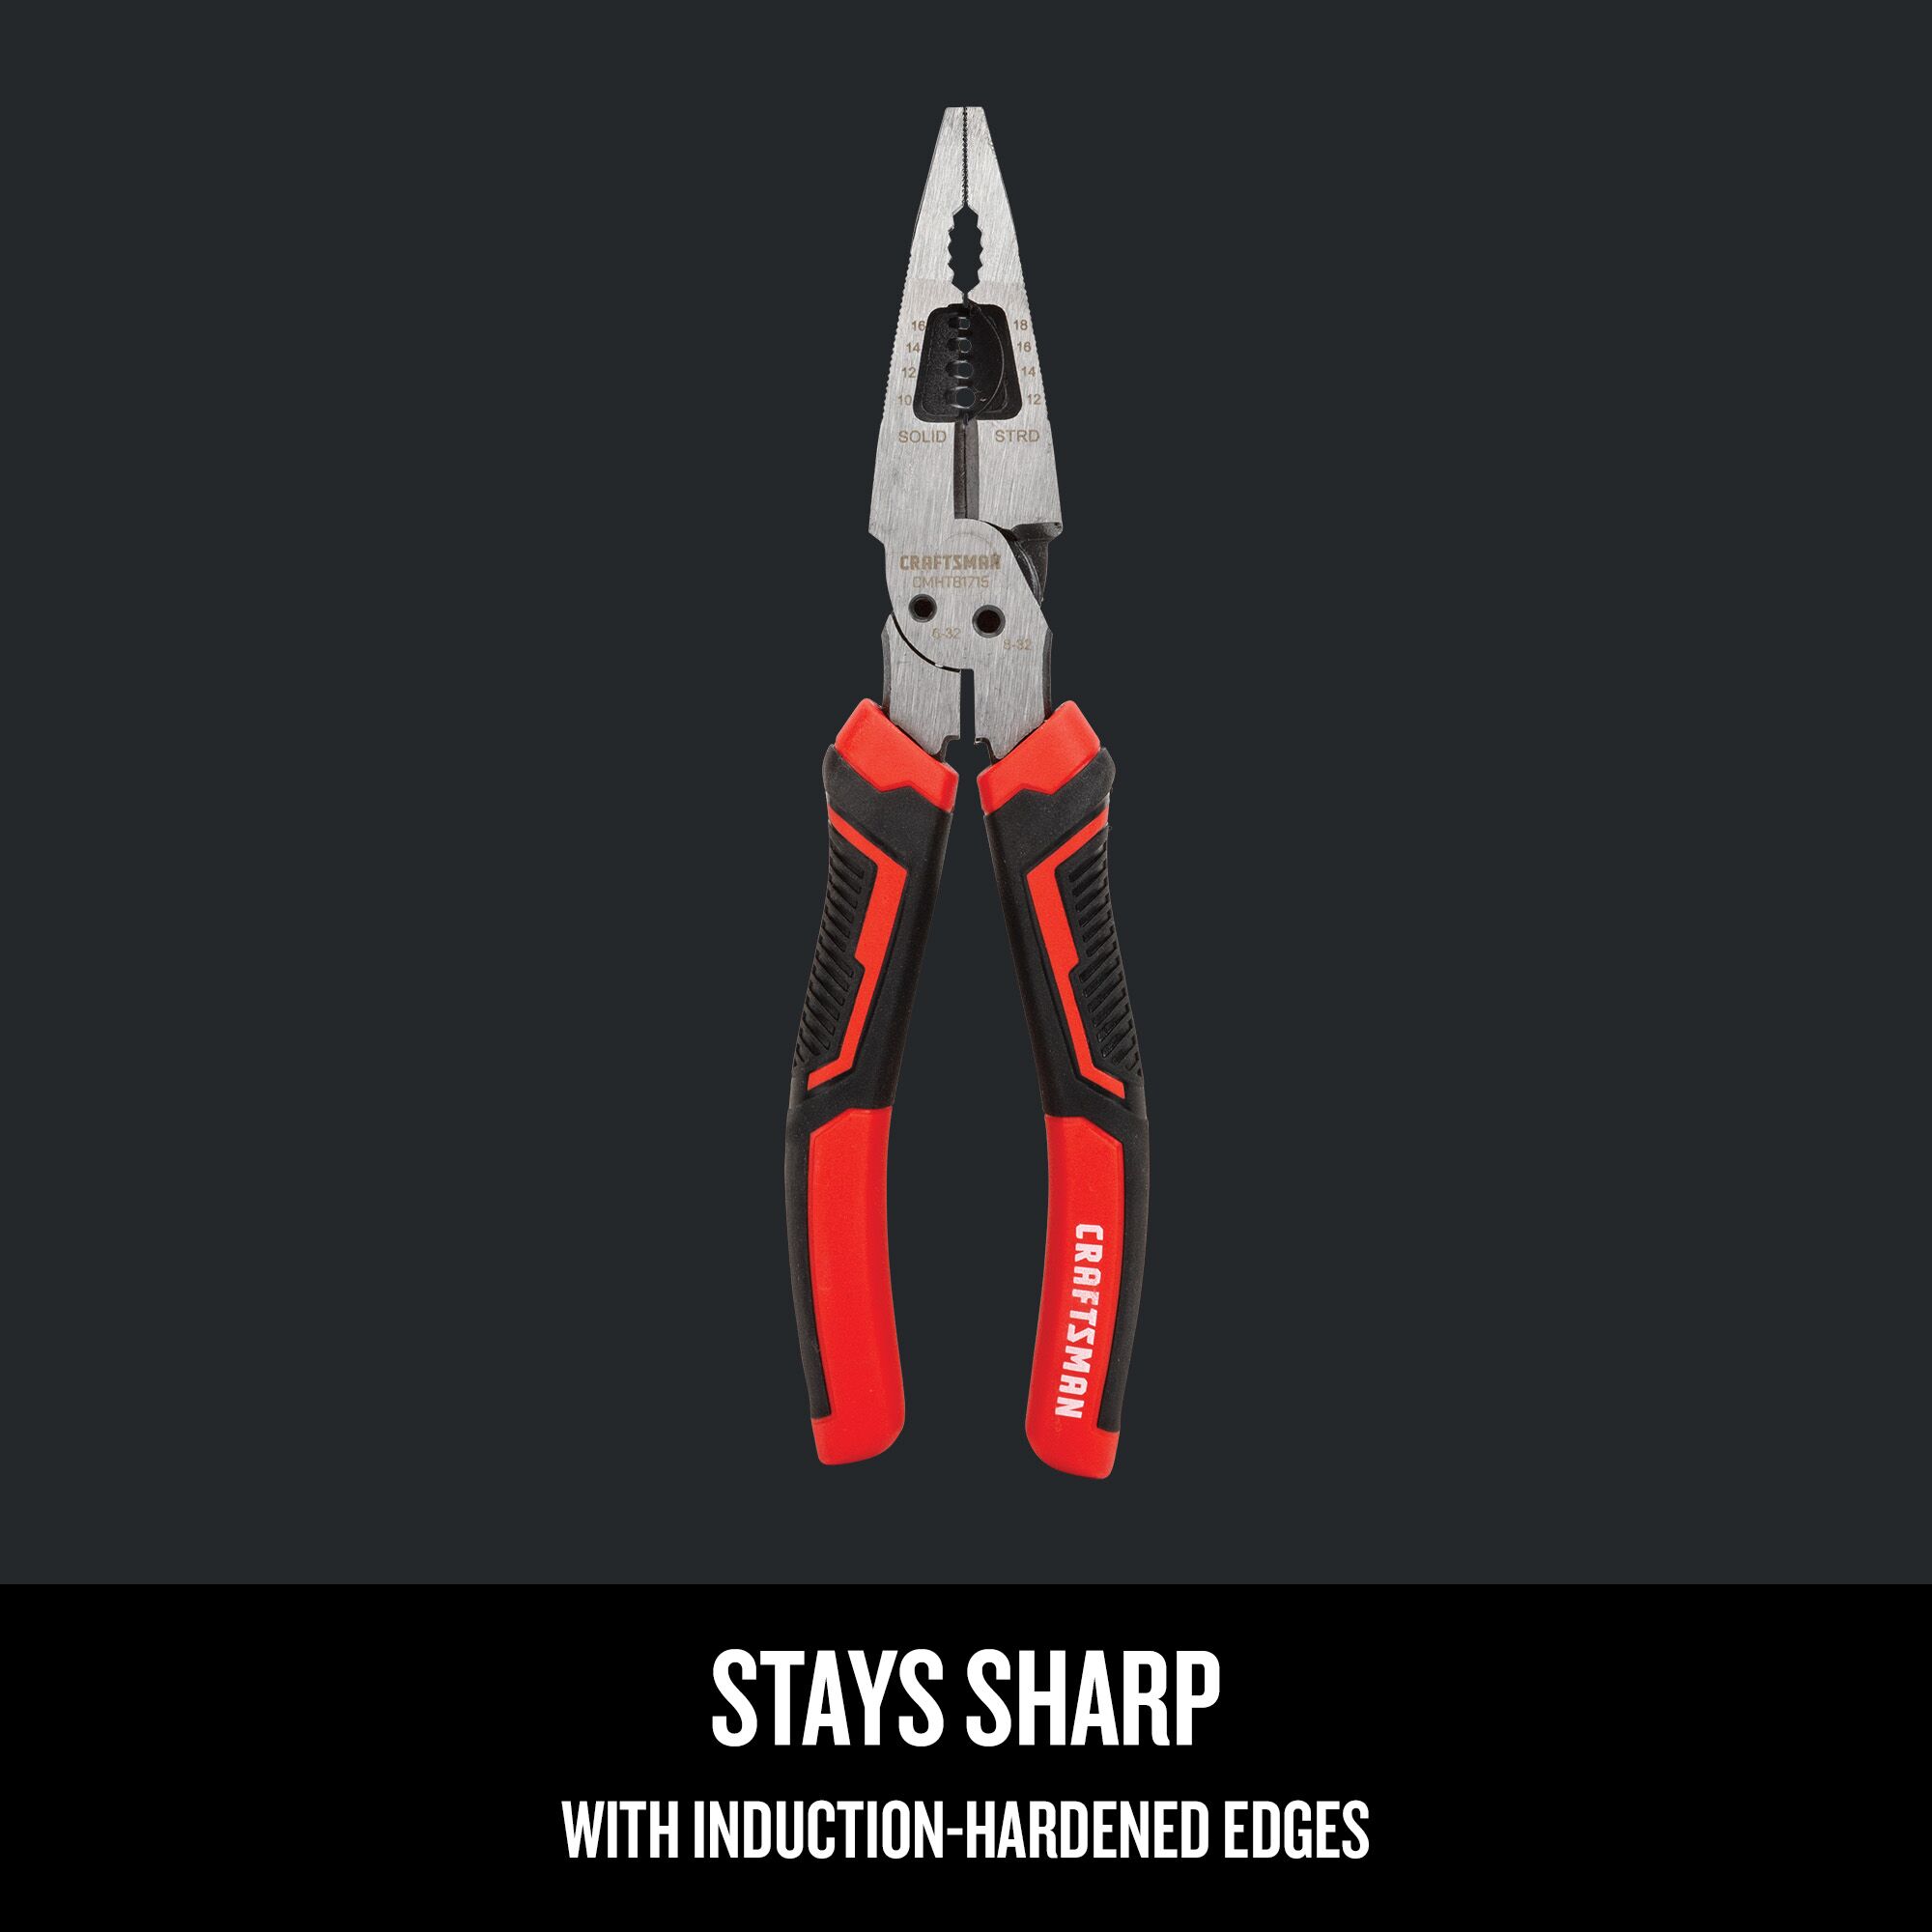 Graphic of CRAFTSMAN Pliers: Long Nose highlighting product features